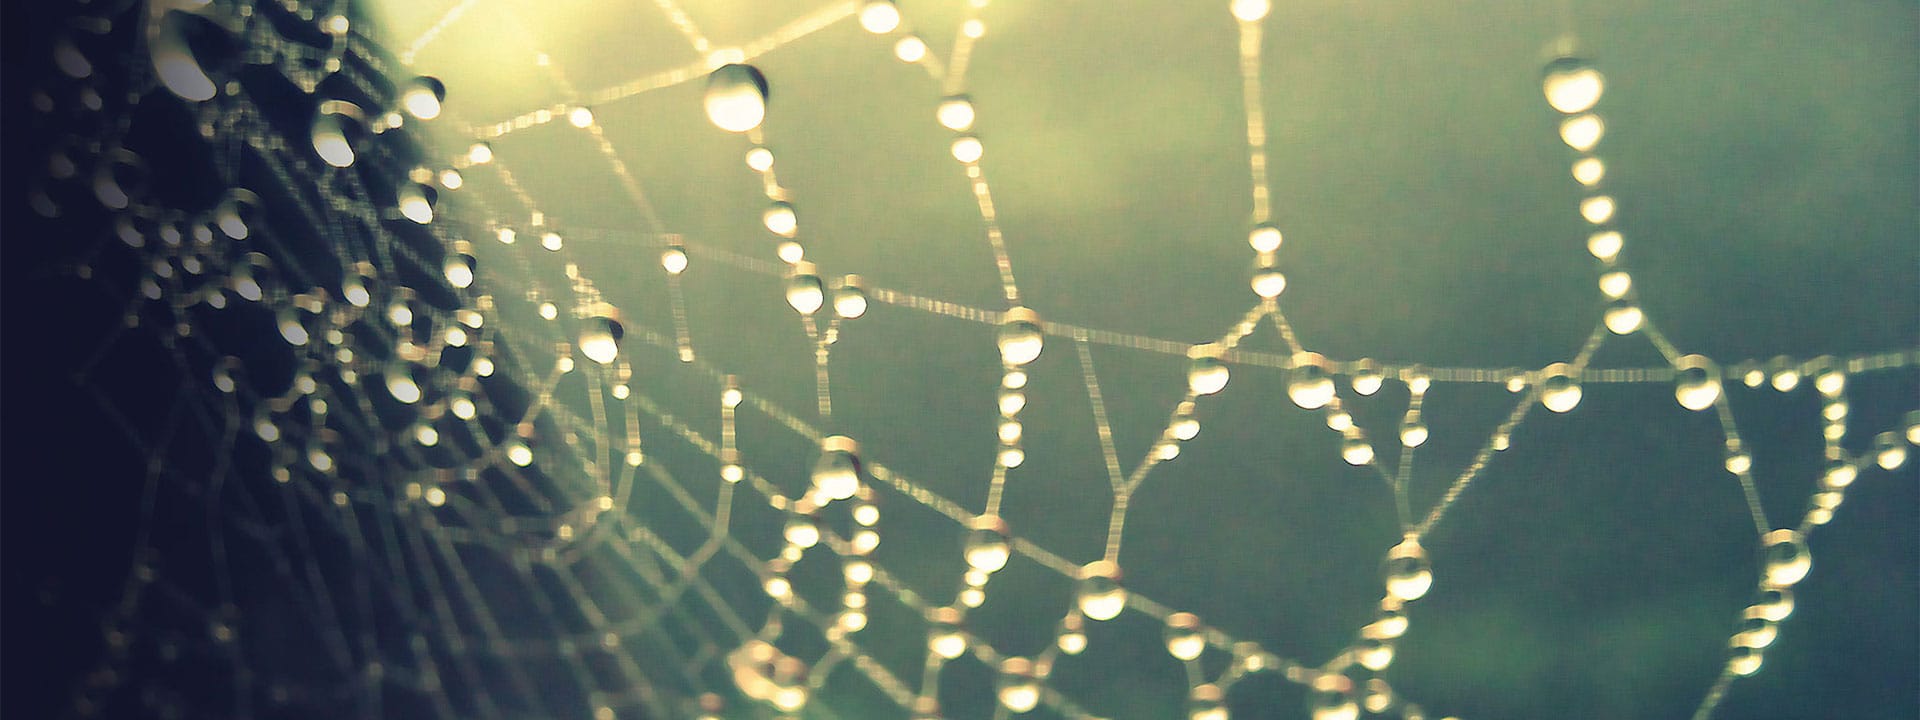 Stylized photo of a spiderweb covered in dew drops, larger version of cover image. Original photo by Wendy Green.